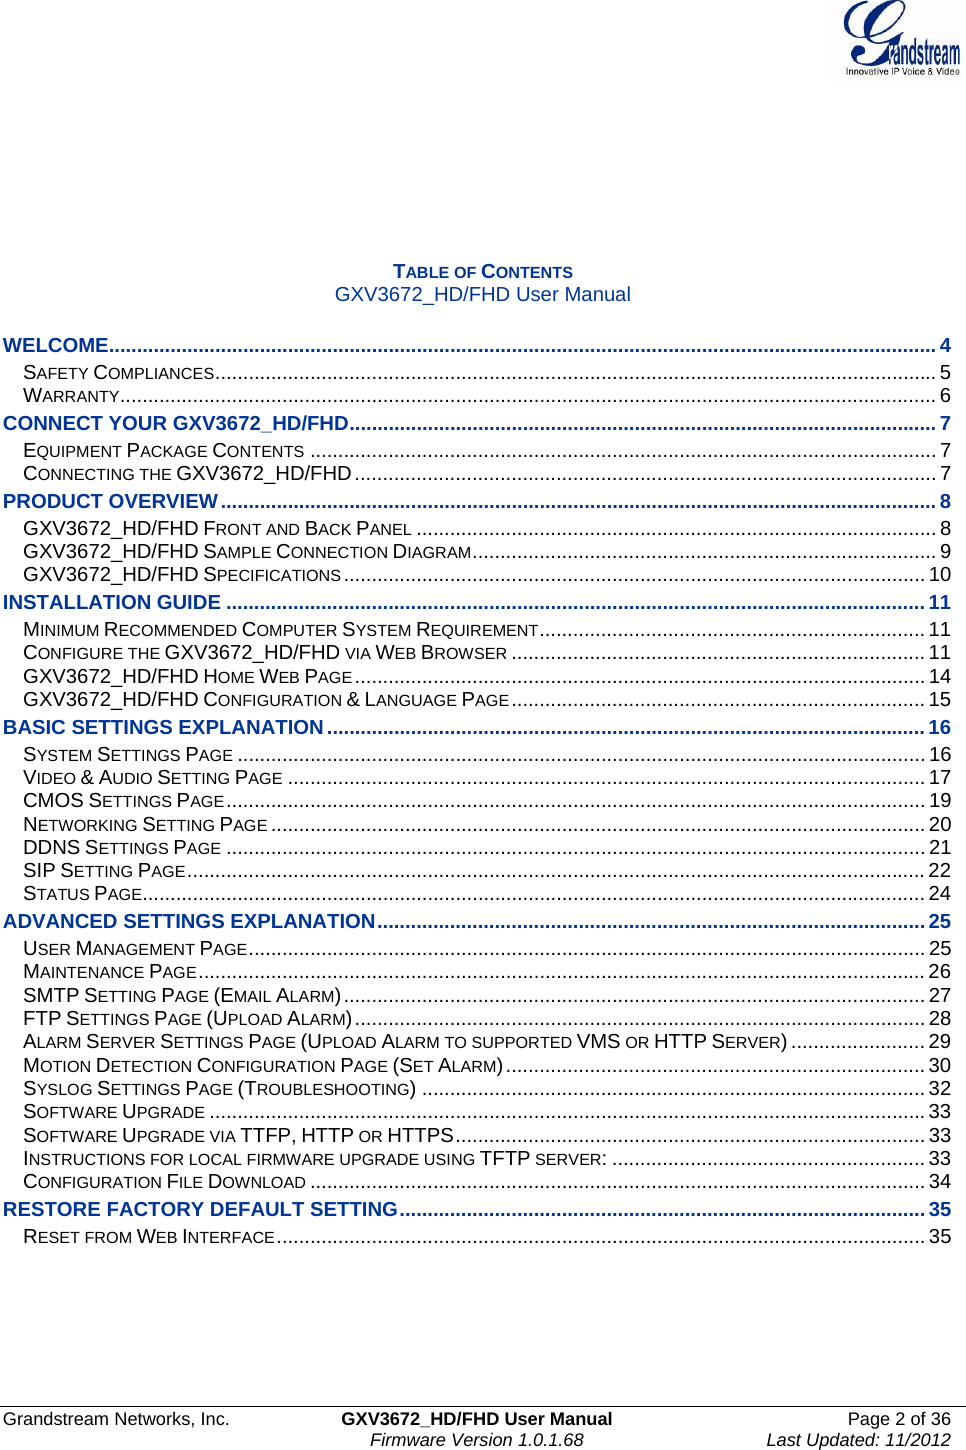  Grandstream Networks, Inc.  GXV3672_HD/FHD User Manual  Page 2 of 36    Firmware Version 1.0.1.68  Last Updated: 11/2012        TABLE OF CONTENTS GXV3672_HD/FHD User Manual  WELCOME.................................................................................................................................................... 4SAFETY COMPLIANCES................................................................................................................................. 5WARRANTY.................................................................................................................................................. 6CONNECT YOUR GXV3672_HD/FHD......................................................................................................... 7EQUIPMENT PACKAGE CONTENTS ................................................................................................................ 7CONNECTING THE GXV3672_HD/FHD........................................................................................................ 7PRODUCT OVERVIEW................................................................................................................................ 8GXV3672_HD/FHD FRONT AND BACK PANEL ............................................................................................. 8GXV3672_HD/FHD SAMPLE CONNECTION DIAGRAM................................................................................... 9GXV3672_HD/FHD SPECIFICATIONS........................................................................................................ 10INSTALLATION GUIDE .............................................................................................................................11MINIMUM RECOMMENDED COMPUTER SYSTEM REQUIREMENT..................................................................... 11CONFIGURE THE GXV3672_HD/FHD VIA WEB BROWSER .......................................................................... 11GXV3672_HD/FHD HOME WEB PAGE ...................................................................................................... 14GXV3672_HD/FHD CONFIGURATION &amp; LANGUAGE PAGE.......................................................................... 15BASIC SETTINGS EXPLANATION...........................................................................................................16SYSTEM SETTINGS PAGE ........................................................................................................................... 16VIDEO &amp; AUDIO SETTING PAGE .................................................................................................................. 17CMOS SETTINGS PAGE............................................................................................................................. 19NETWORKING SETTING PAGE ..................................................................................................................... 20DDNS SETTINGS PAGE ............................................................................................................................. 21SIP SETTING PAGE.................................................................................................................................... 22STATUS PAGE............................................................................................................................................ 24ADVANCED SETTINGS EXPLANATION..................................................................................................25USER MANAGEMENT PAGE......................................................................................................................... 25MAINTENANCE PAGE.................................................................................................................................. 26SMTP SETTING PAGE (EMAIL ALARM)........................................................................................................ 27FTP SETTINGS PAGE (UPLOAD ALARM)...................................................................................................... 28ALARM SERVER SETTINGS PAGE (UPLOAD ALARM TO SUPPORTED VMS OR HTTP SERVER) ........................ 29MOTION DETECTION CONFIGURATION PAGE (SET ALARM)........................................................................... 30SYSLOG SETTINGS PAGE (TROUBLESHOOTING) .......................................................................................... 32SOFTWARE UPGRADE ................................................................................................................................33SOFTWARE UPGRADE VIA TTFP, HTTP OR HTTPS.................................................................................... 33INSTRUCTIONS FOR LOCAL FIRMWARE UPGRADE USING TFTP SERVER: ........................................................ 33CONFIGURATION FILE DOWNLOAD .............................................................................................................. 34RESTORE FACTORY DEFAULT SETTING..............................................................................................35RESET FROM WEB INTERFACE.................................................................................................................... 35      